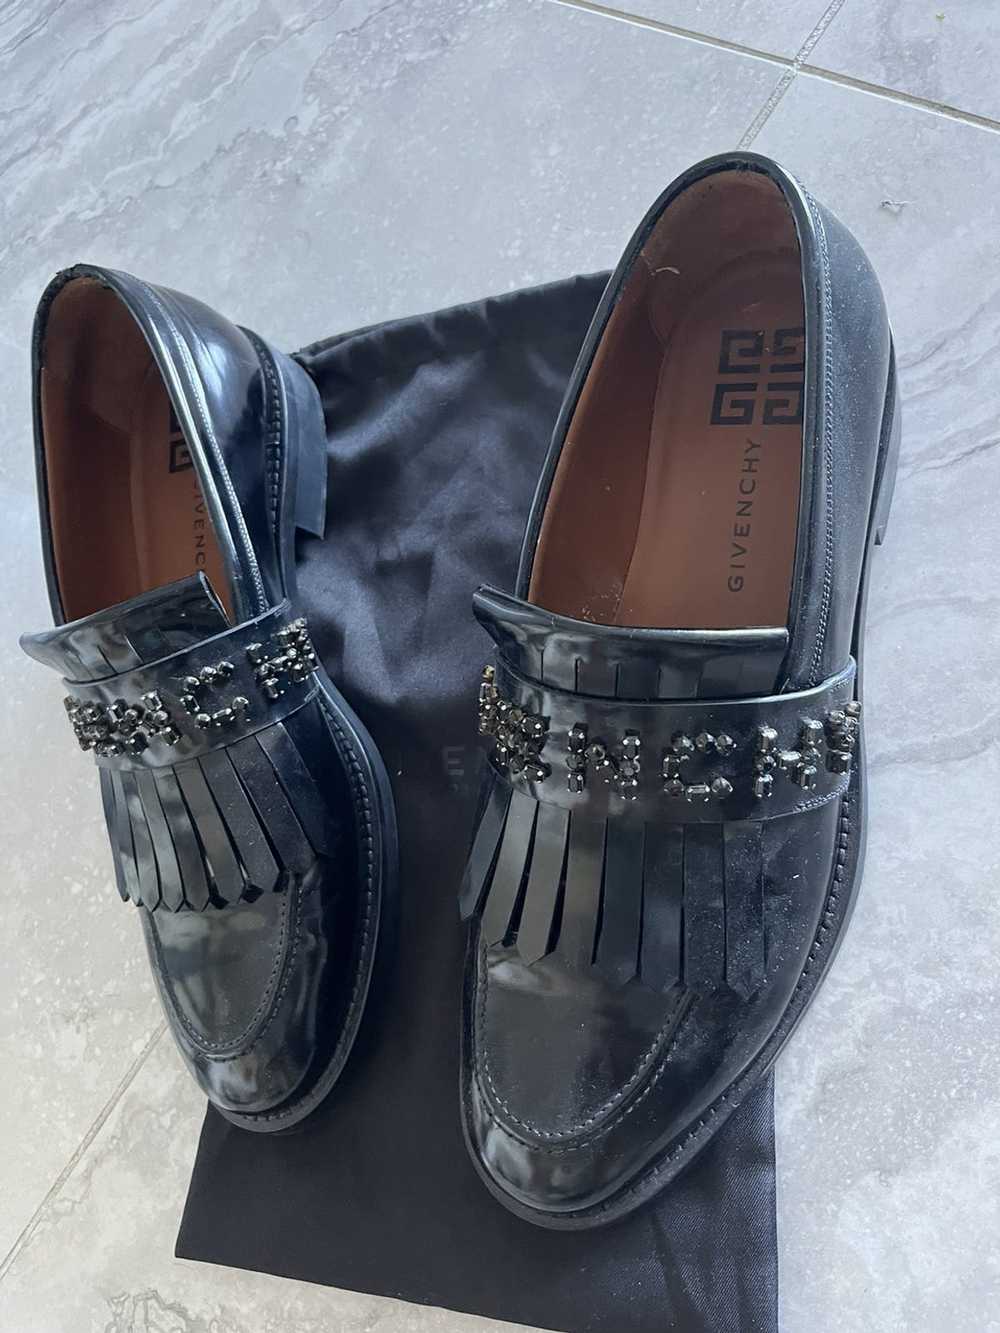 Givenchy Classic Rhinestone Loafers - image 2